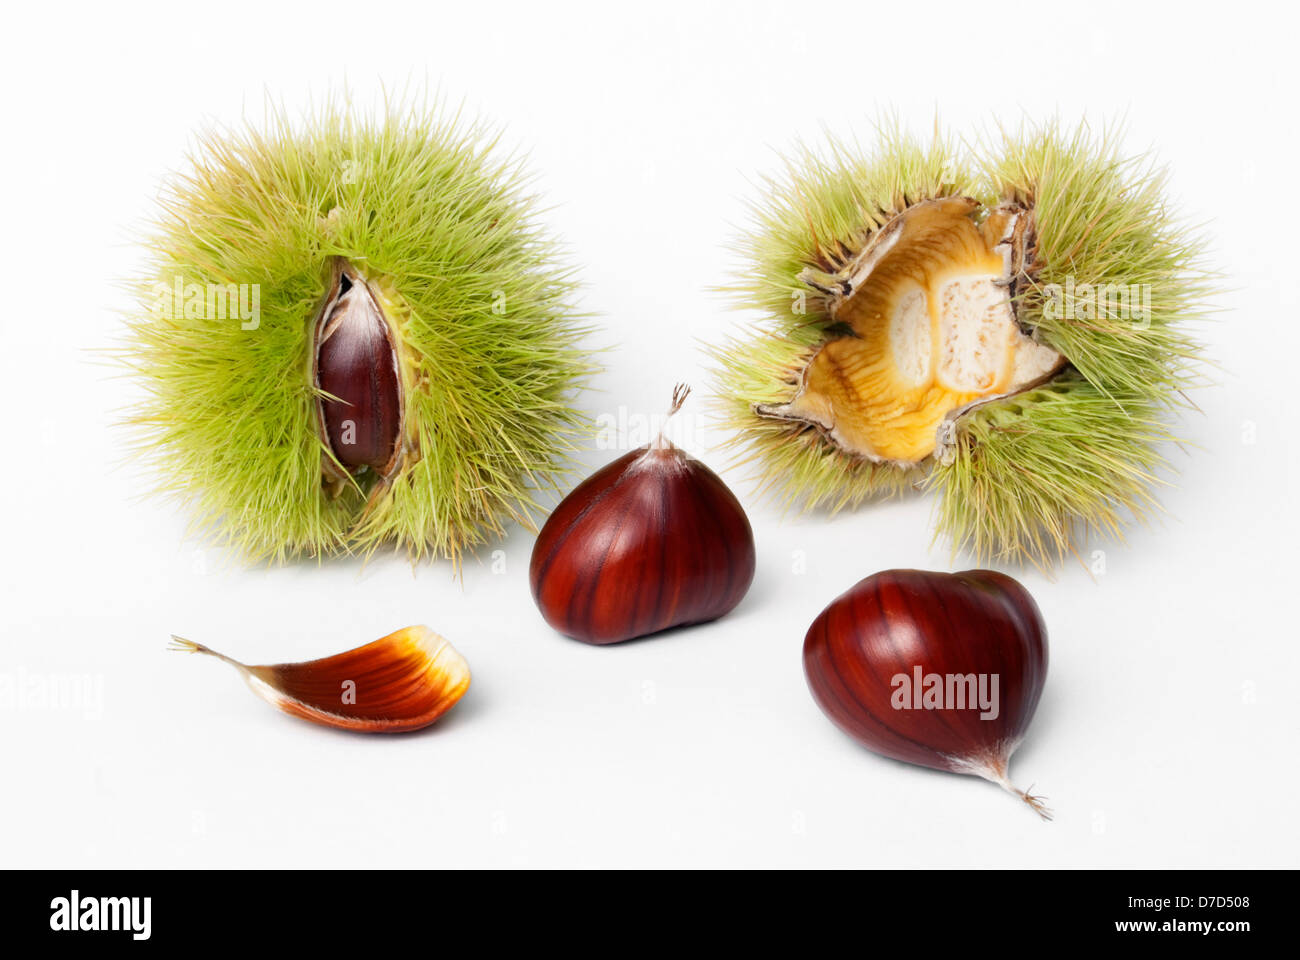 chestnuts fresh fruits and seeds on white background Stock Photo